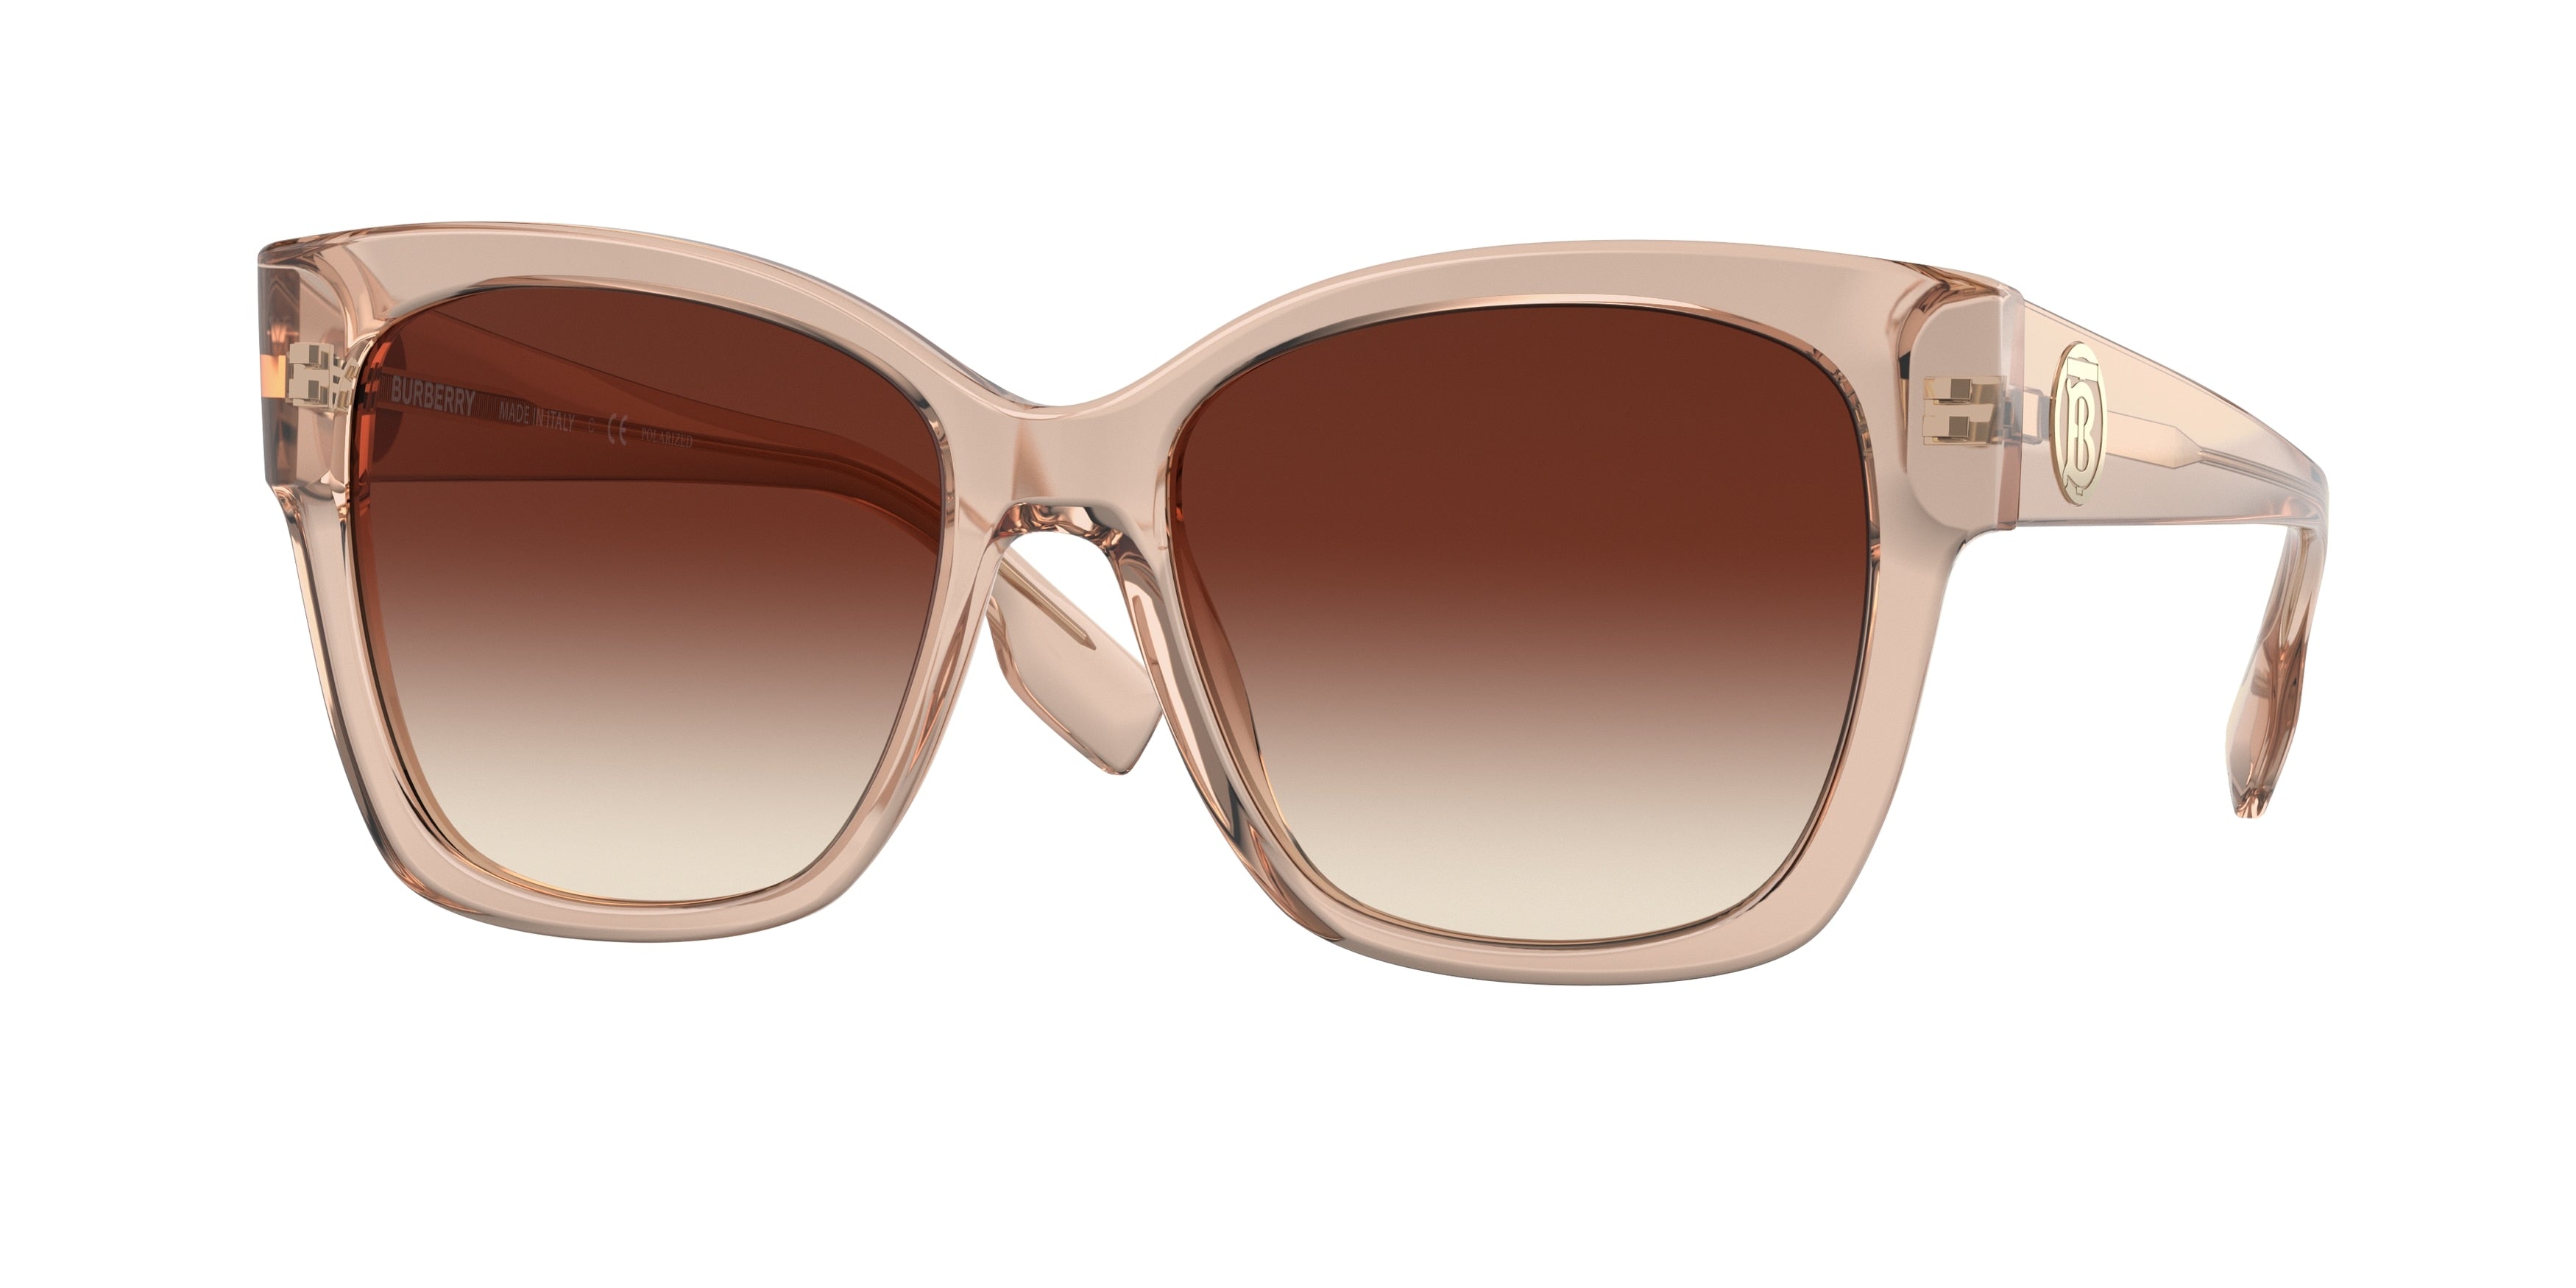 Burberry RUTH BE4345F Square Sunglasses  335813-Peach 55-140-17 - Color Map Pink